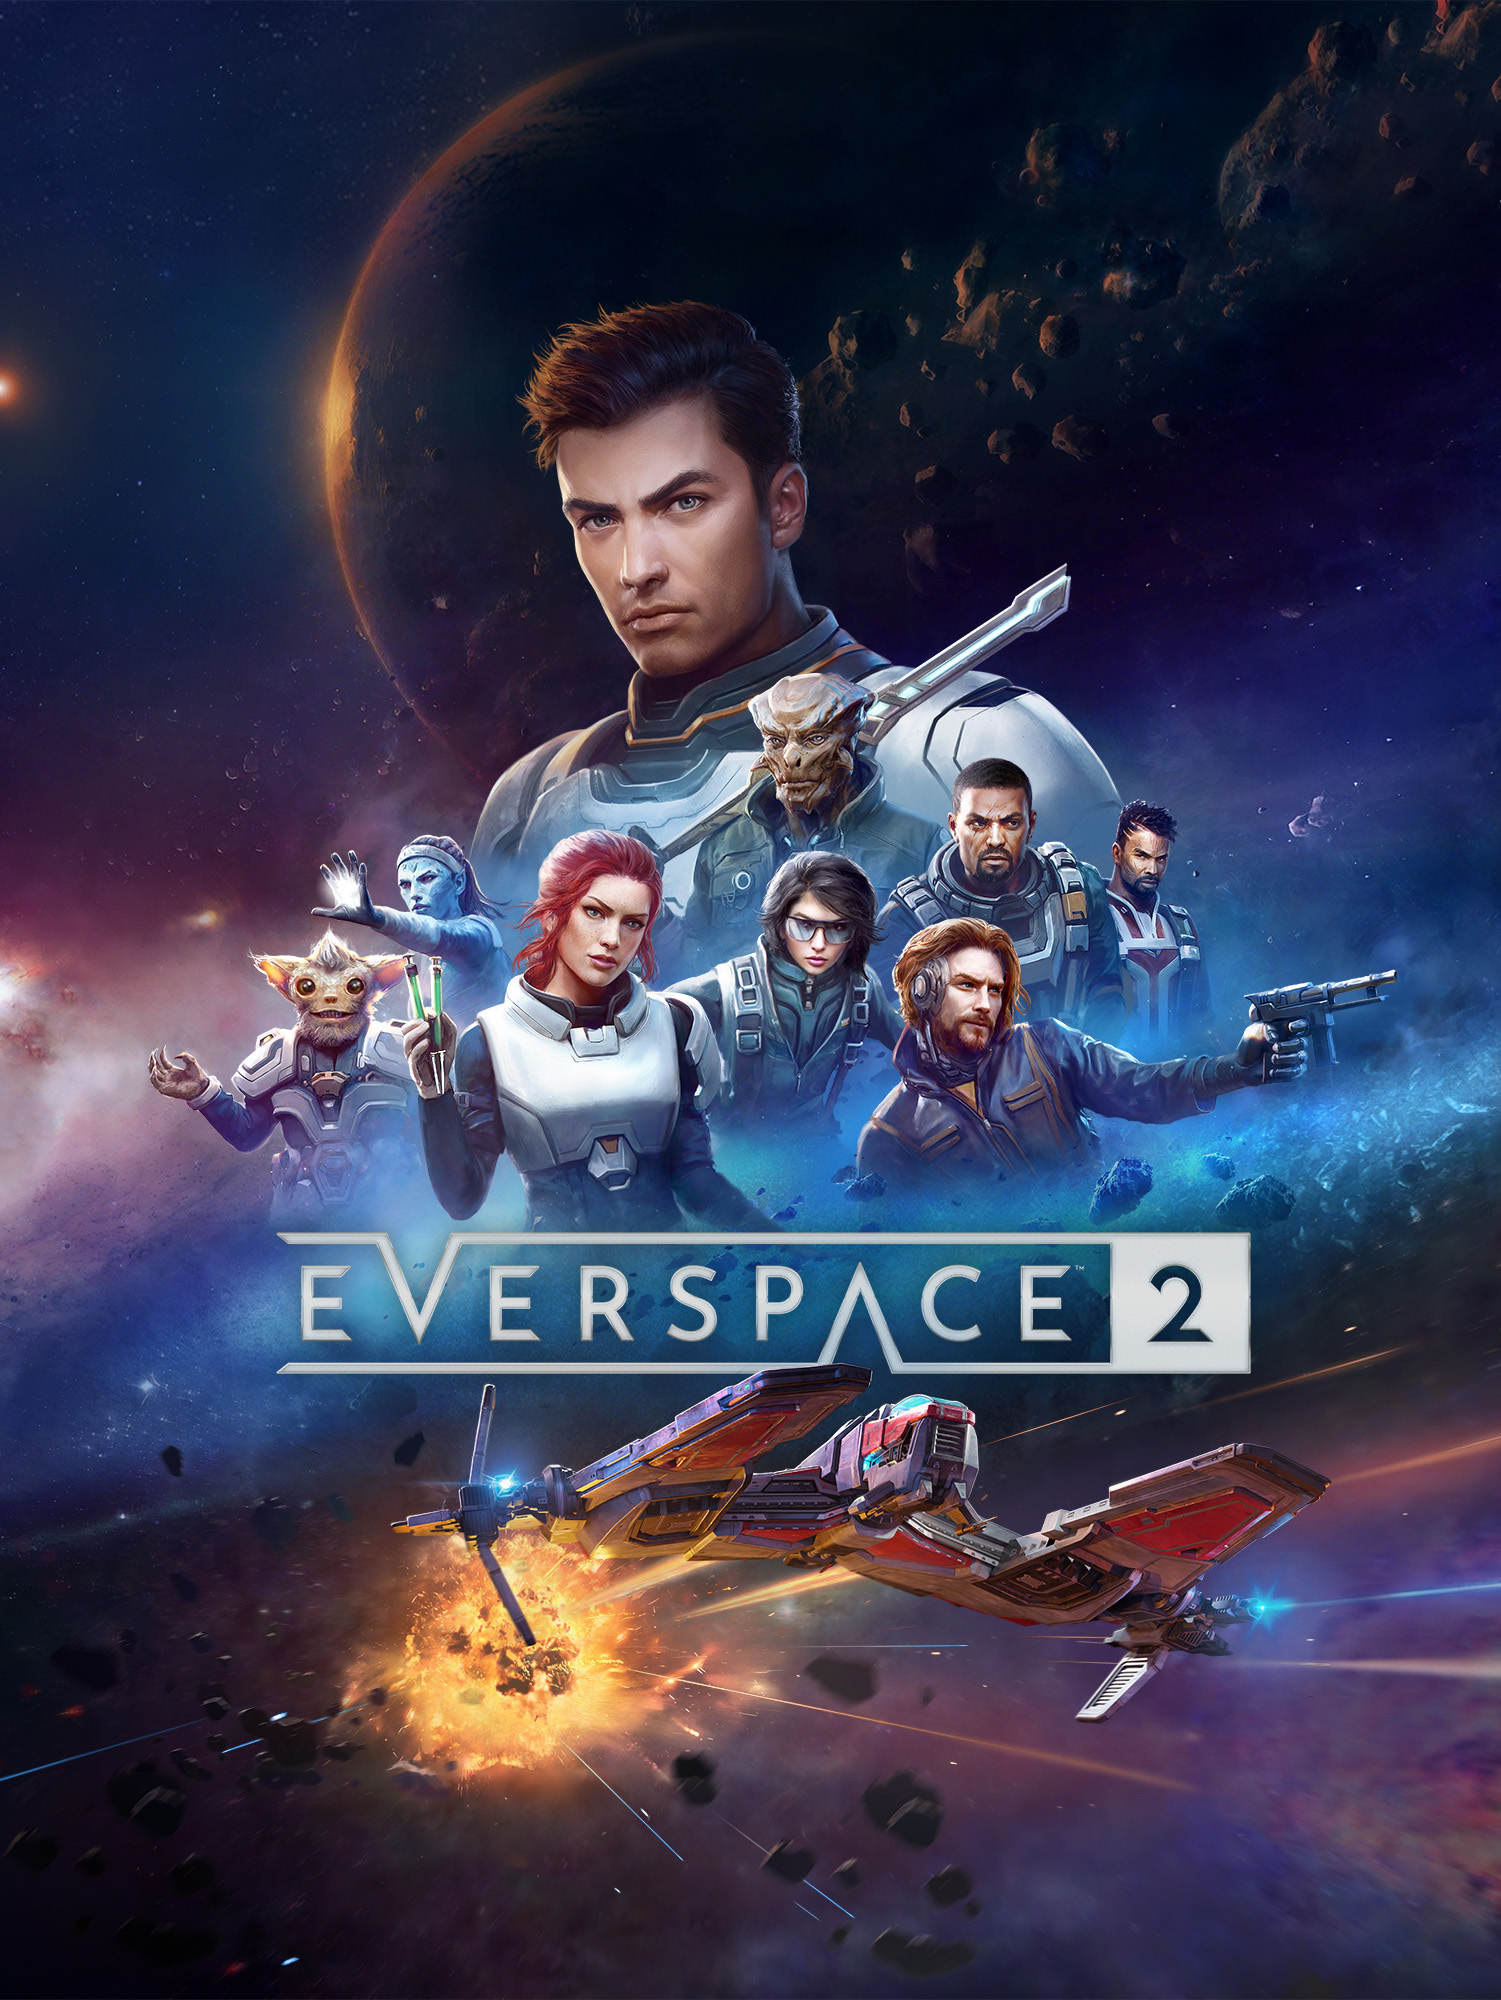 Cheapest Everspace 2 Key - $29.99